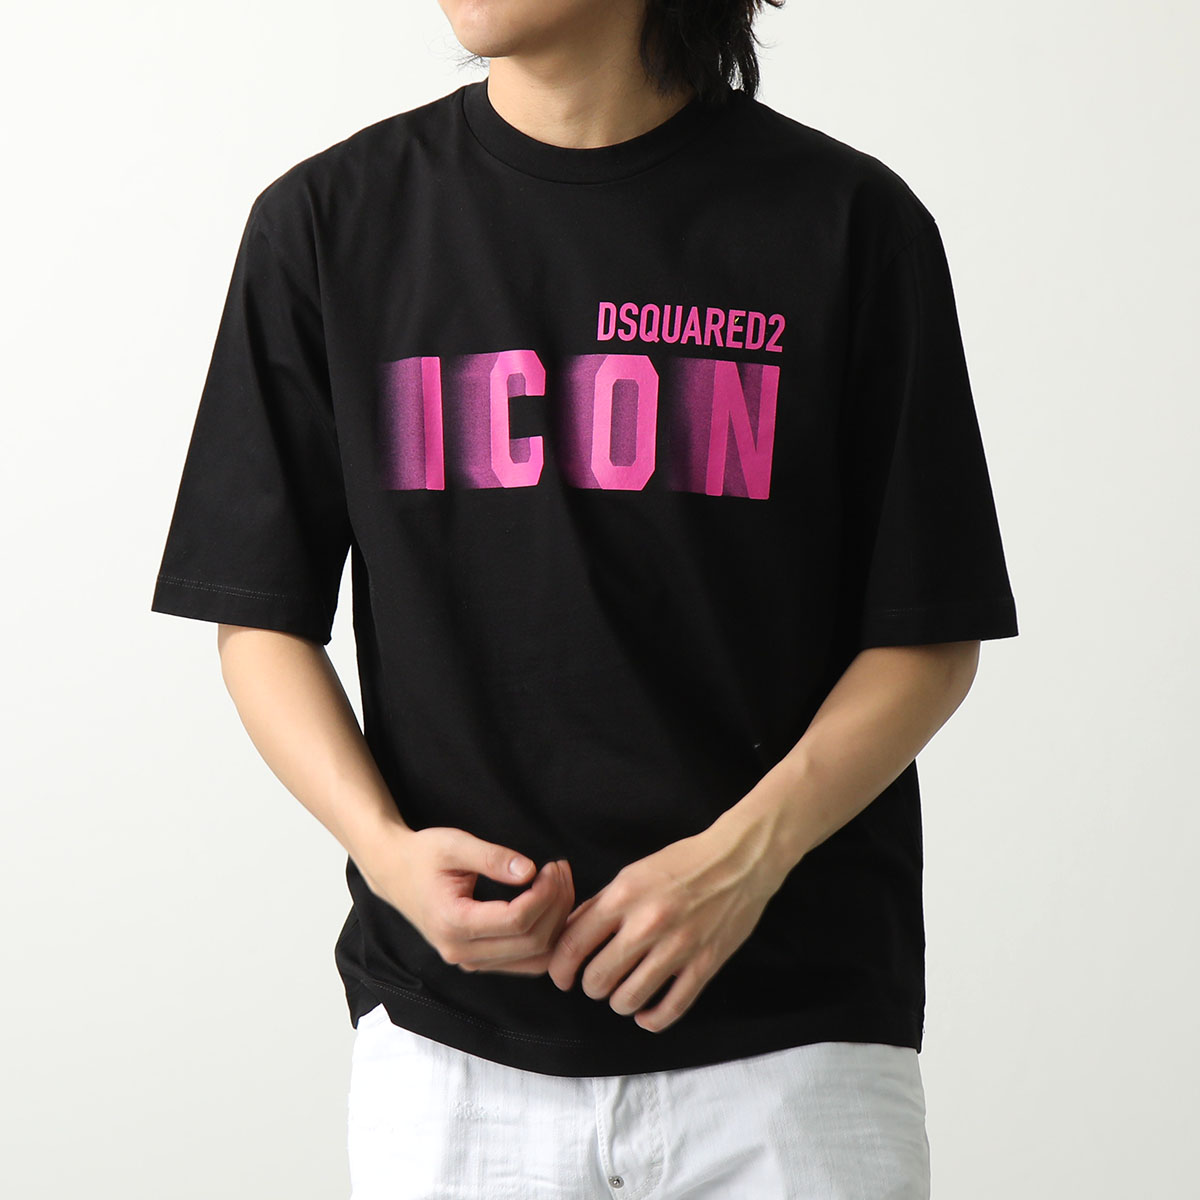 DSQUARED2 ディースクエアード Tシャツ ICON BLUR LOOSE FIT TEE S...